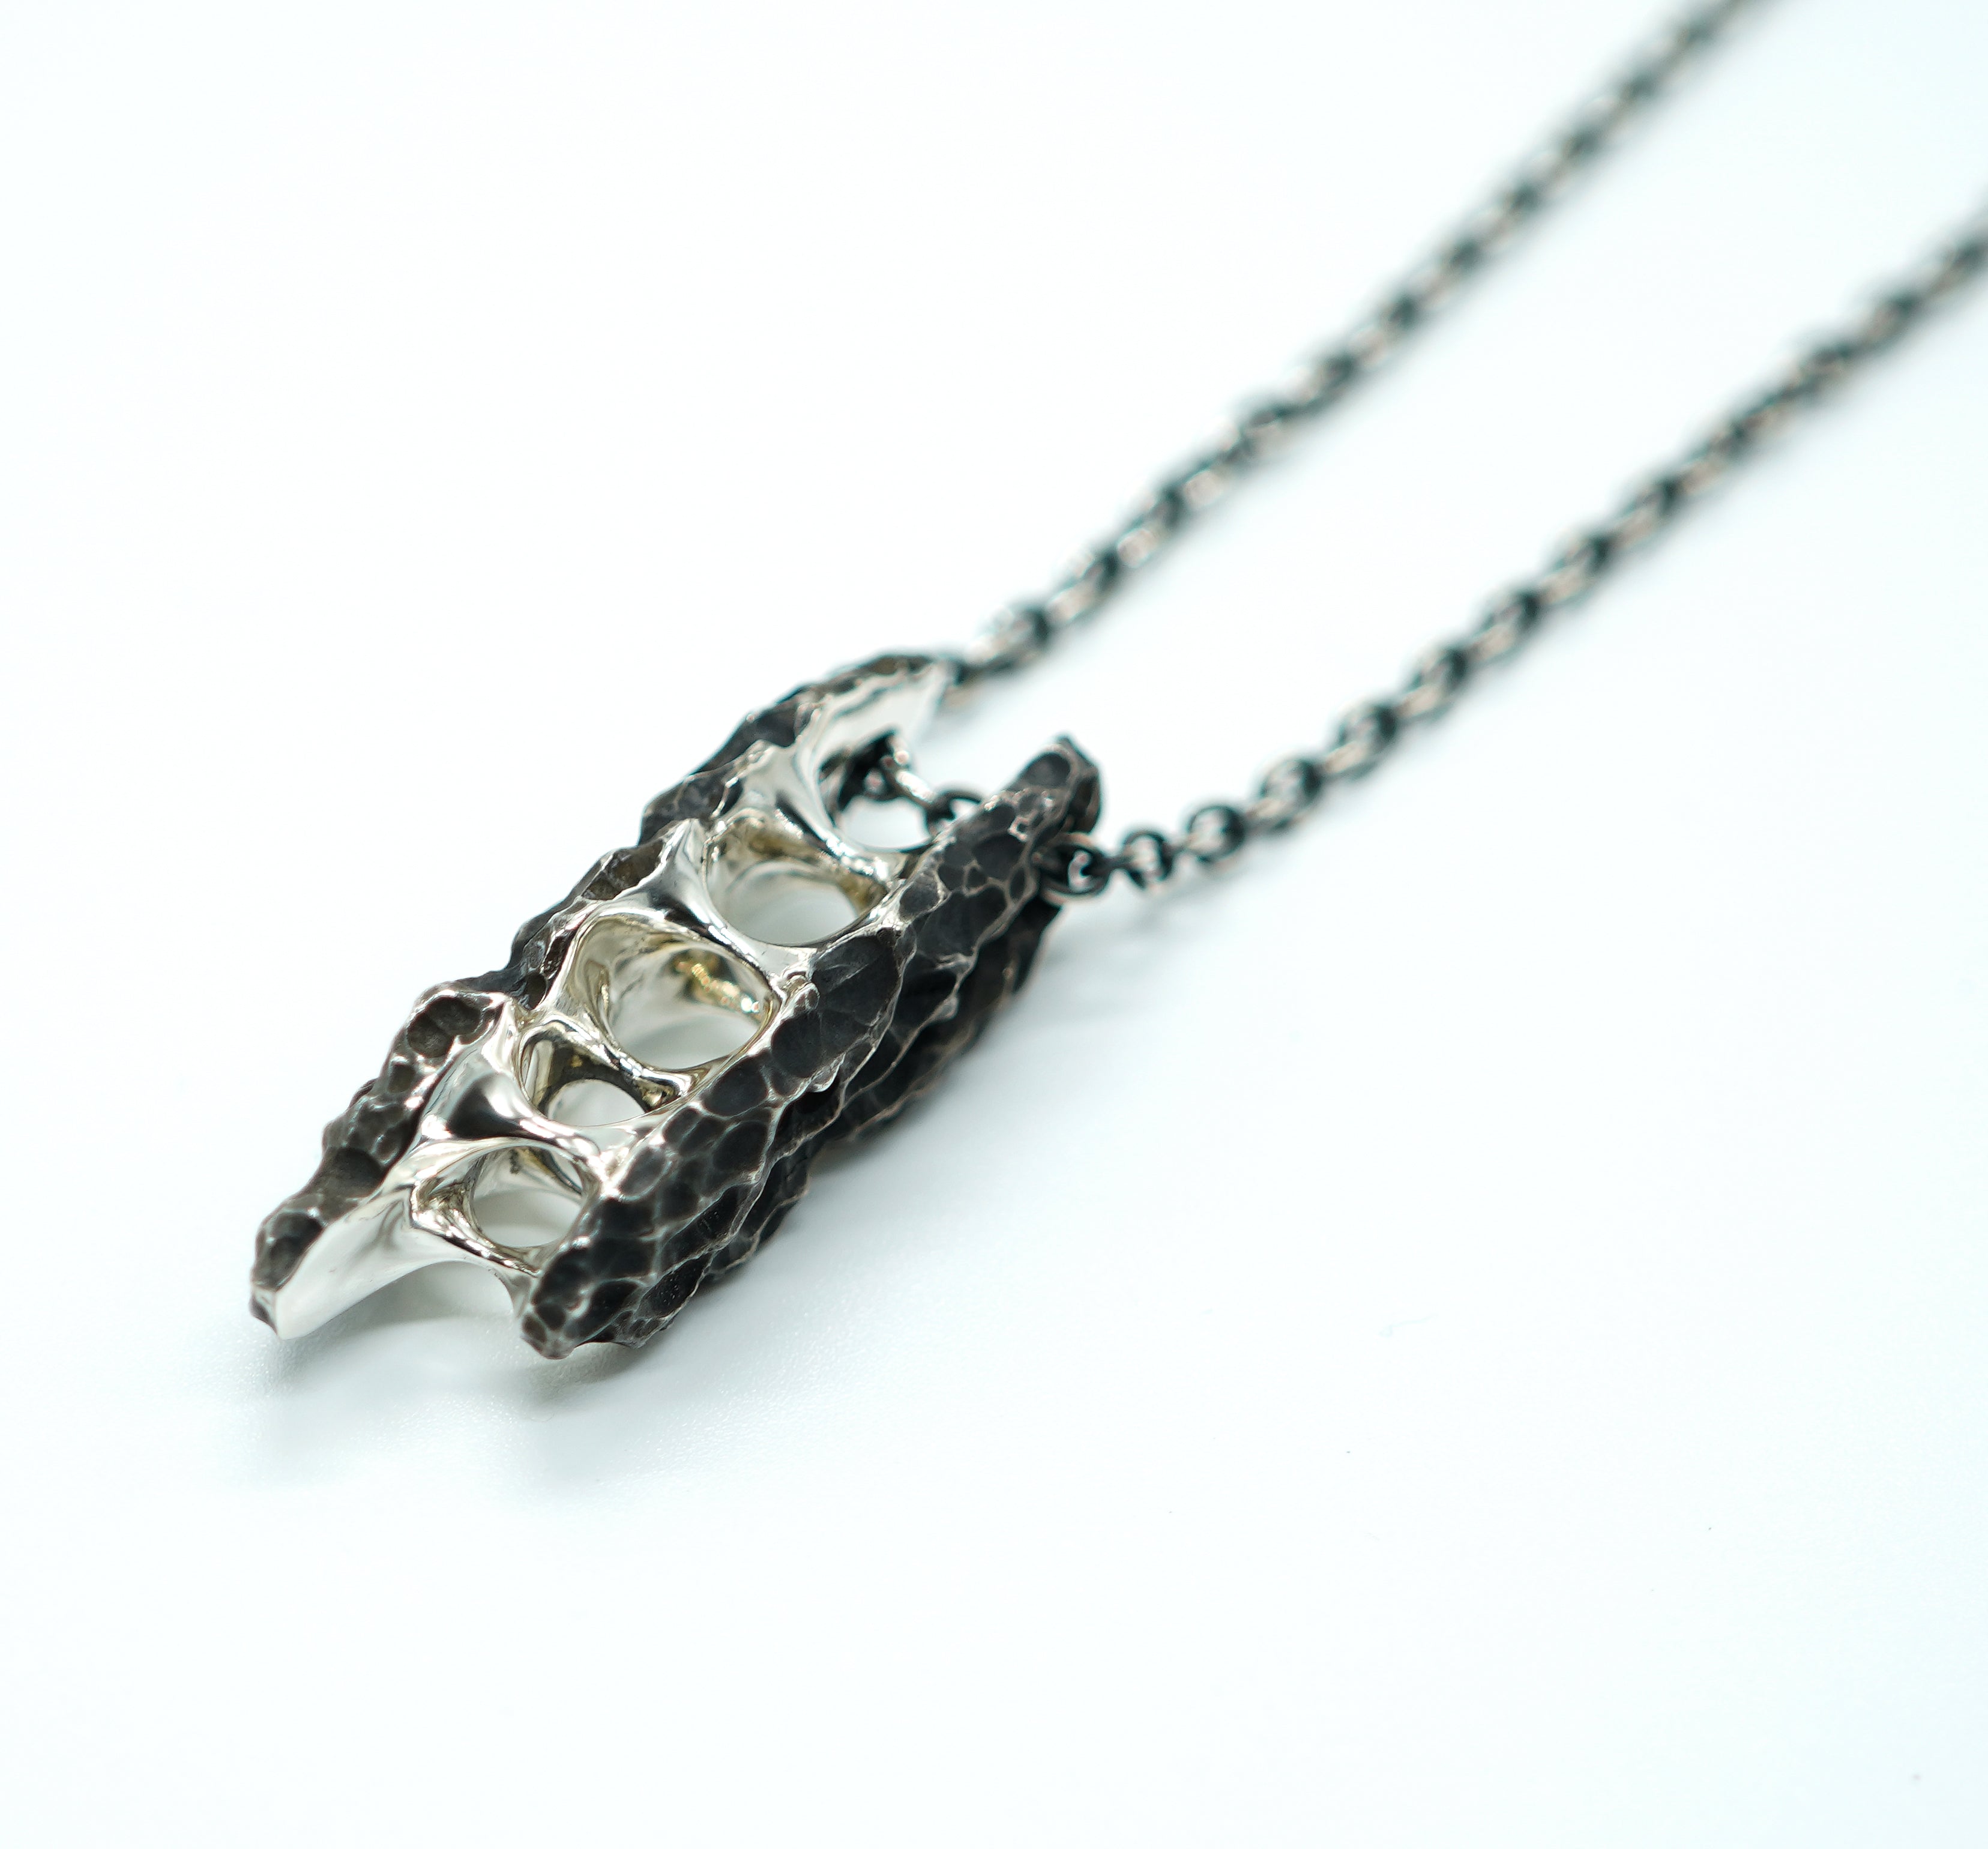 Eternal - Silver necklace with original clasp